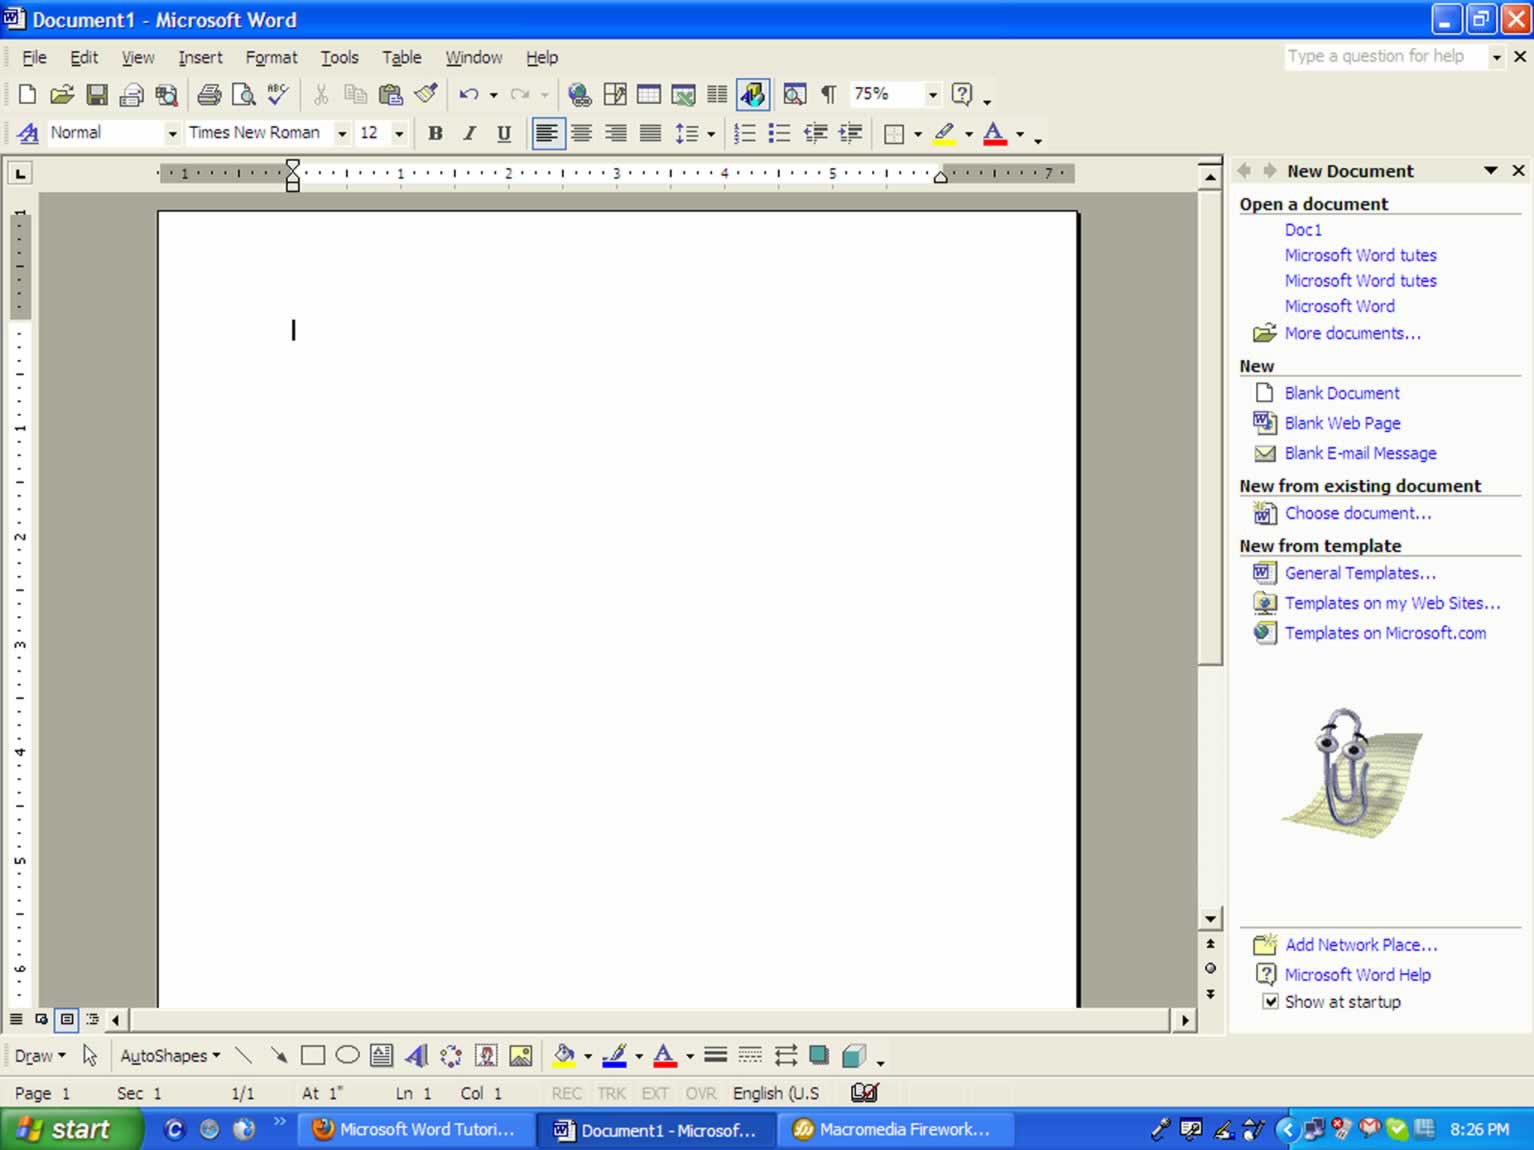 Microsoft Word XP Document Editing with Clippy (2002)